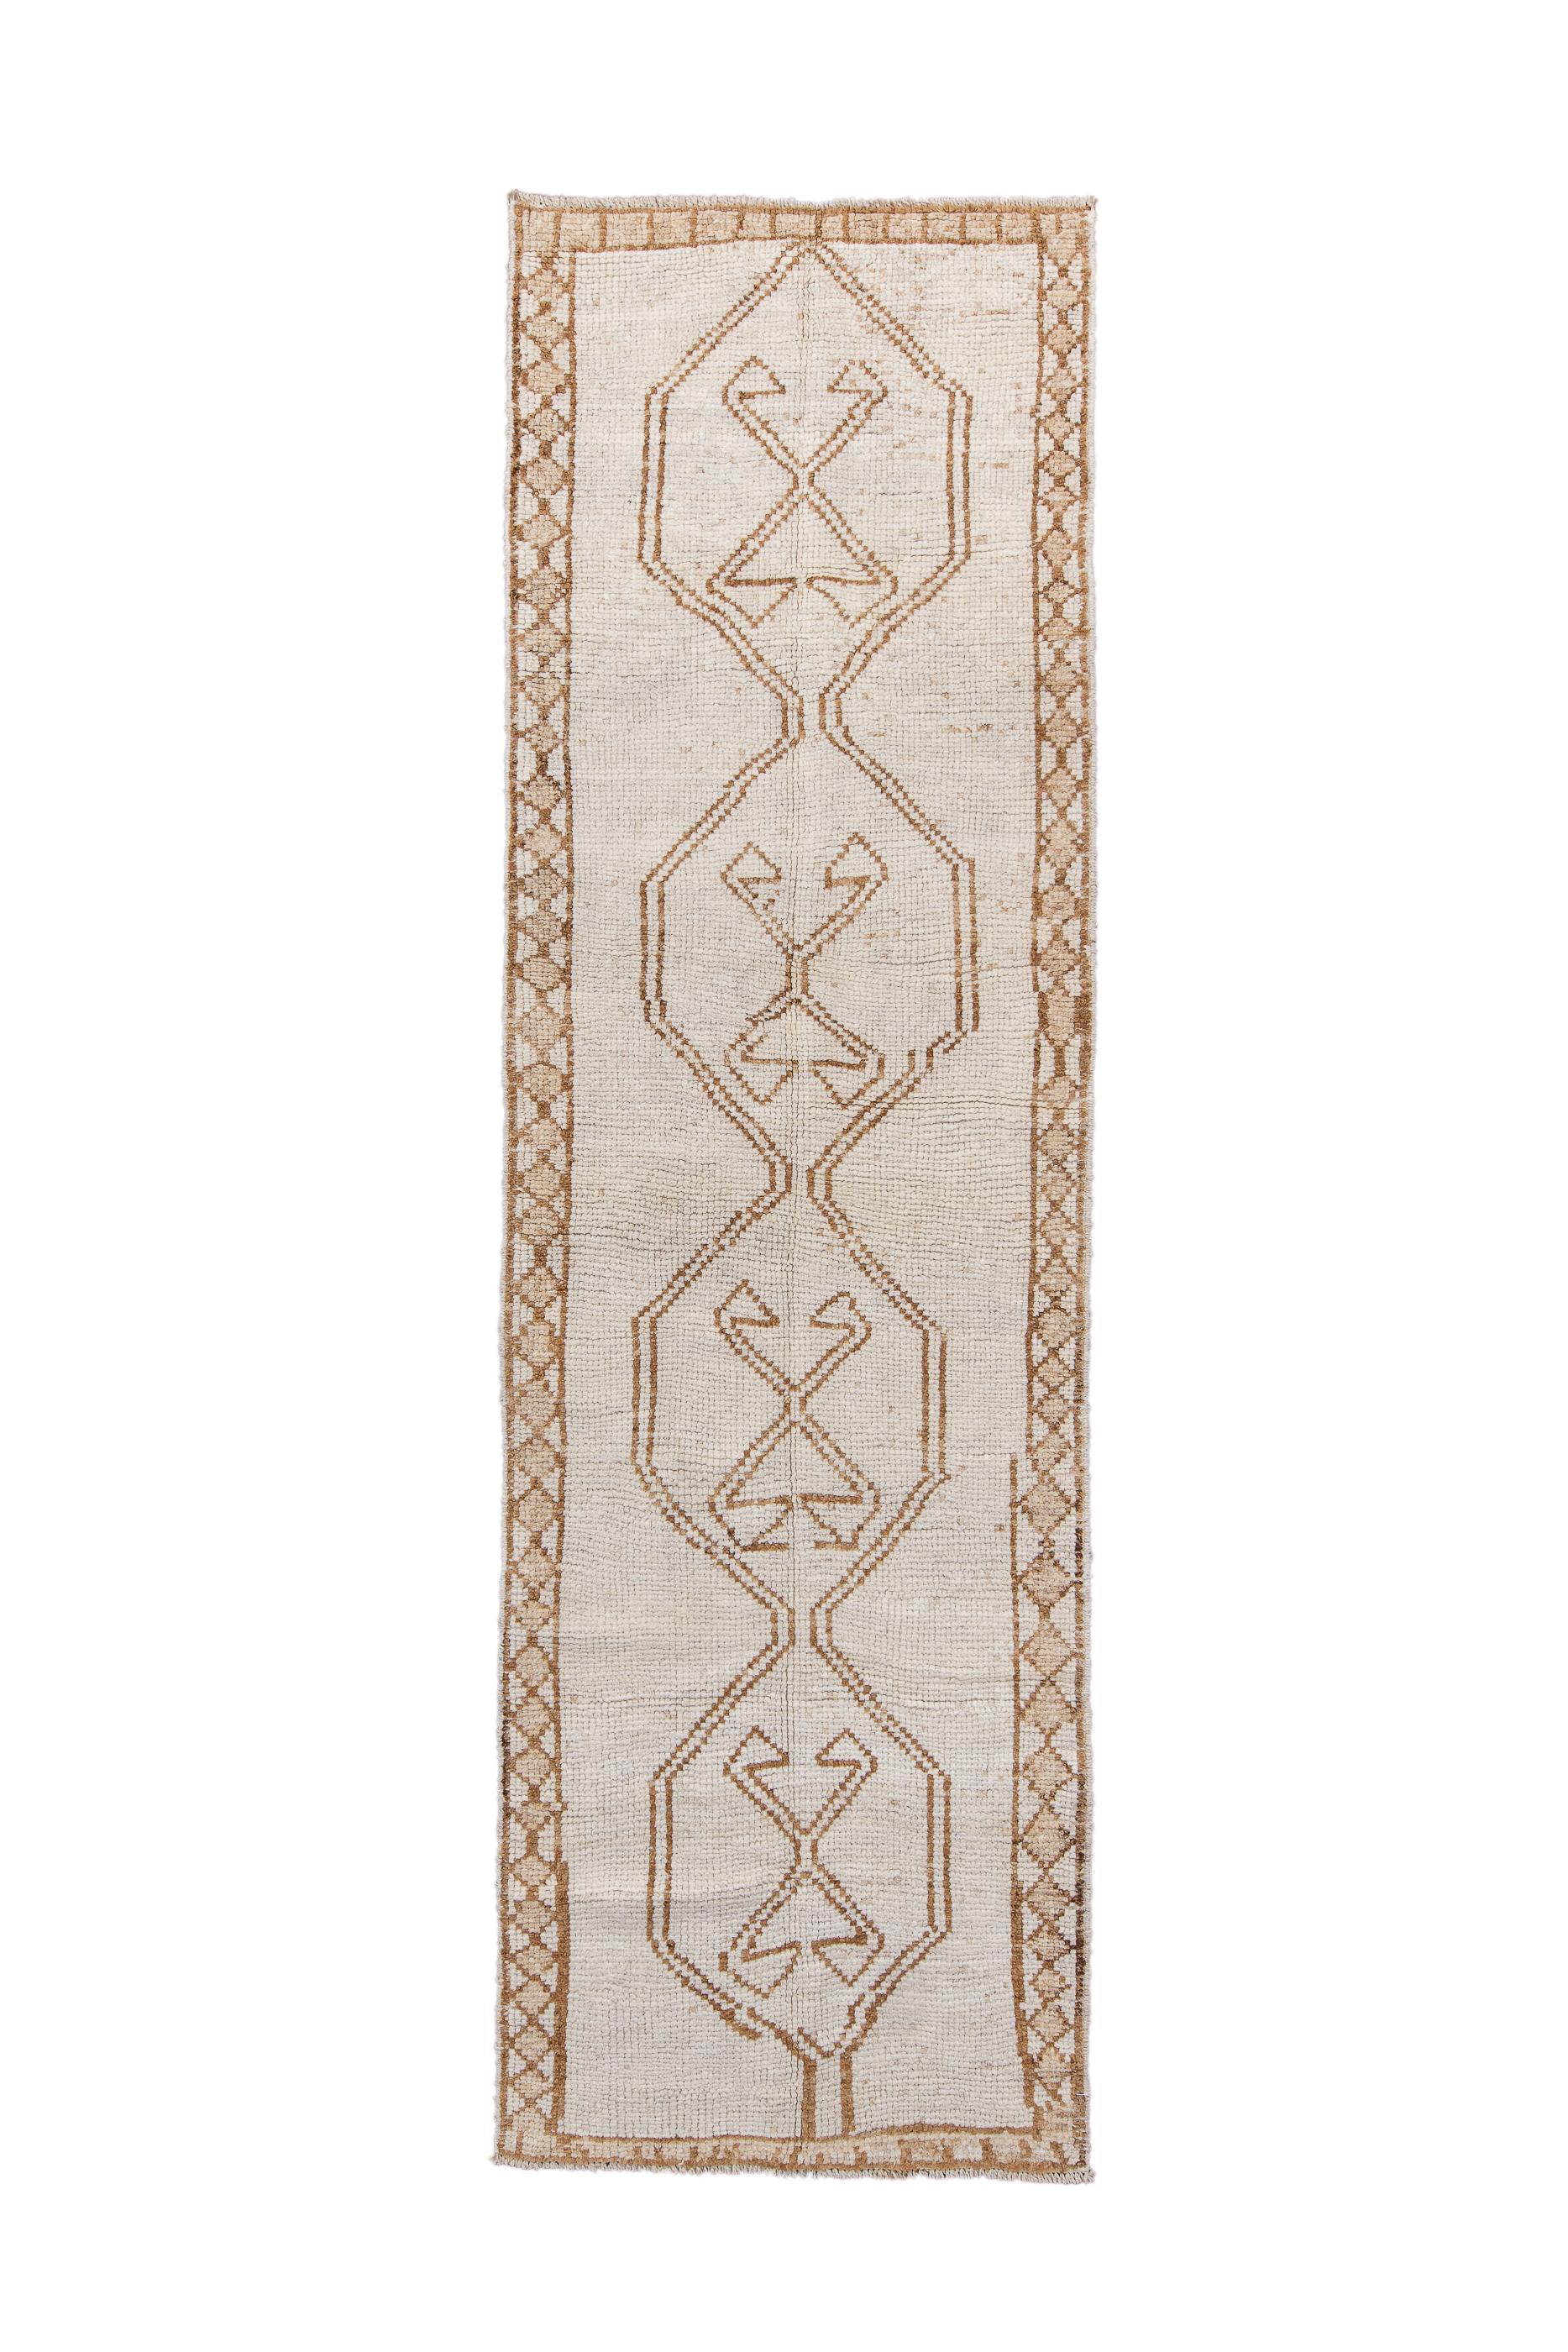 This definitely rustic kenare (runner) shows a lightly abrashed cream/sand open field centred by an equal ly open, tonally en suite pole medallion composed of four connected hexagons with quadruple ram’s horn  inner motives. The very narrow border